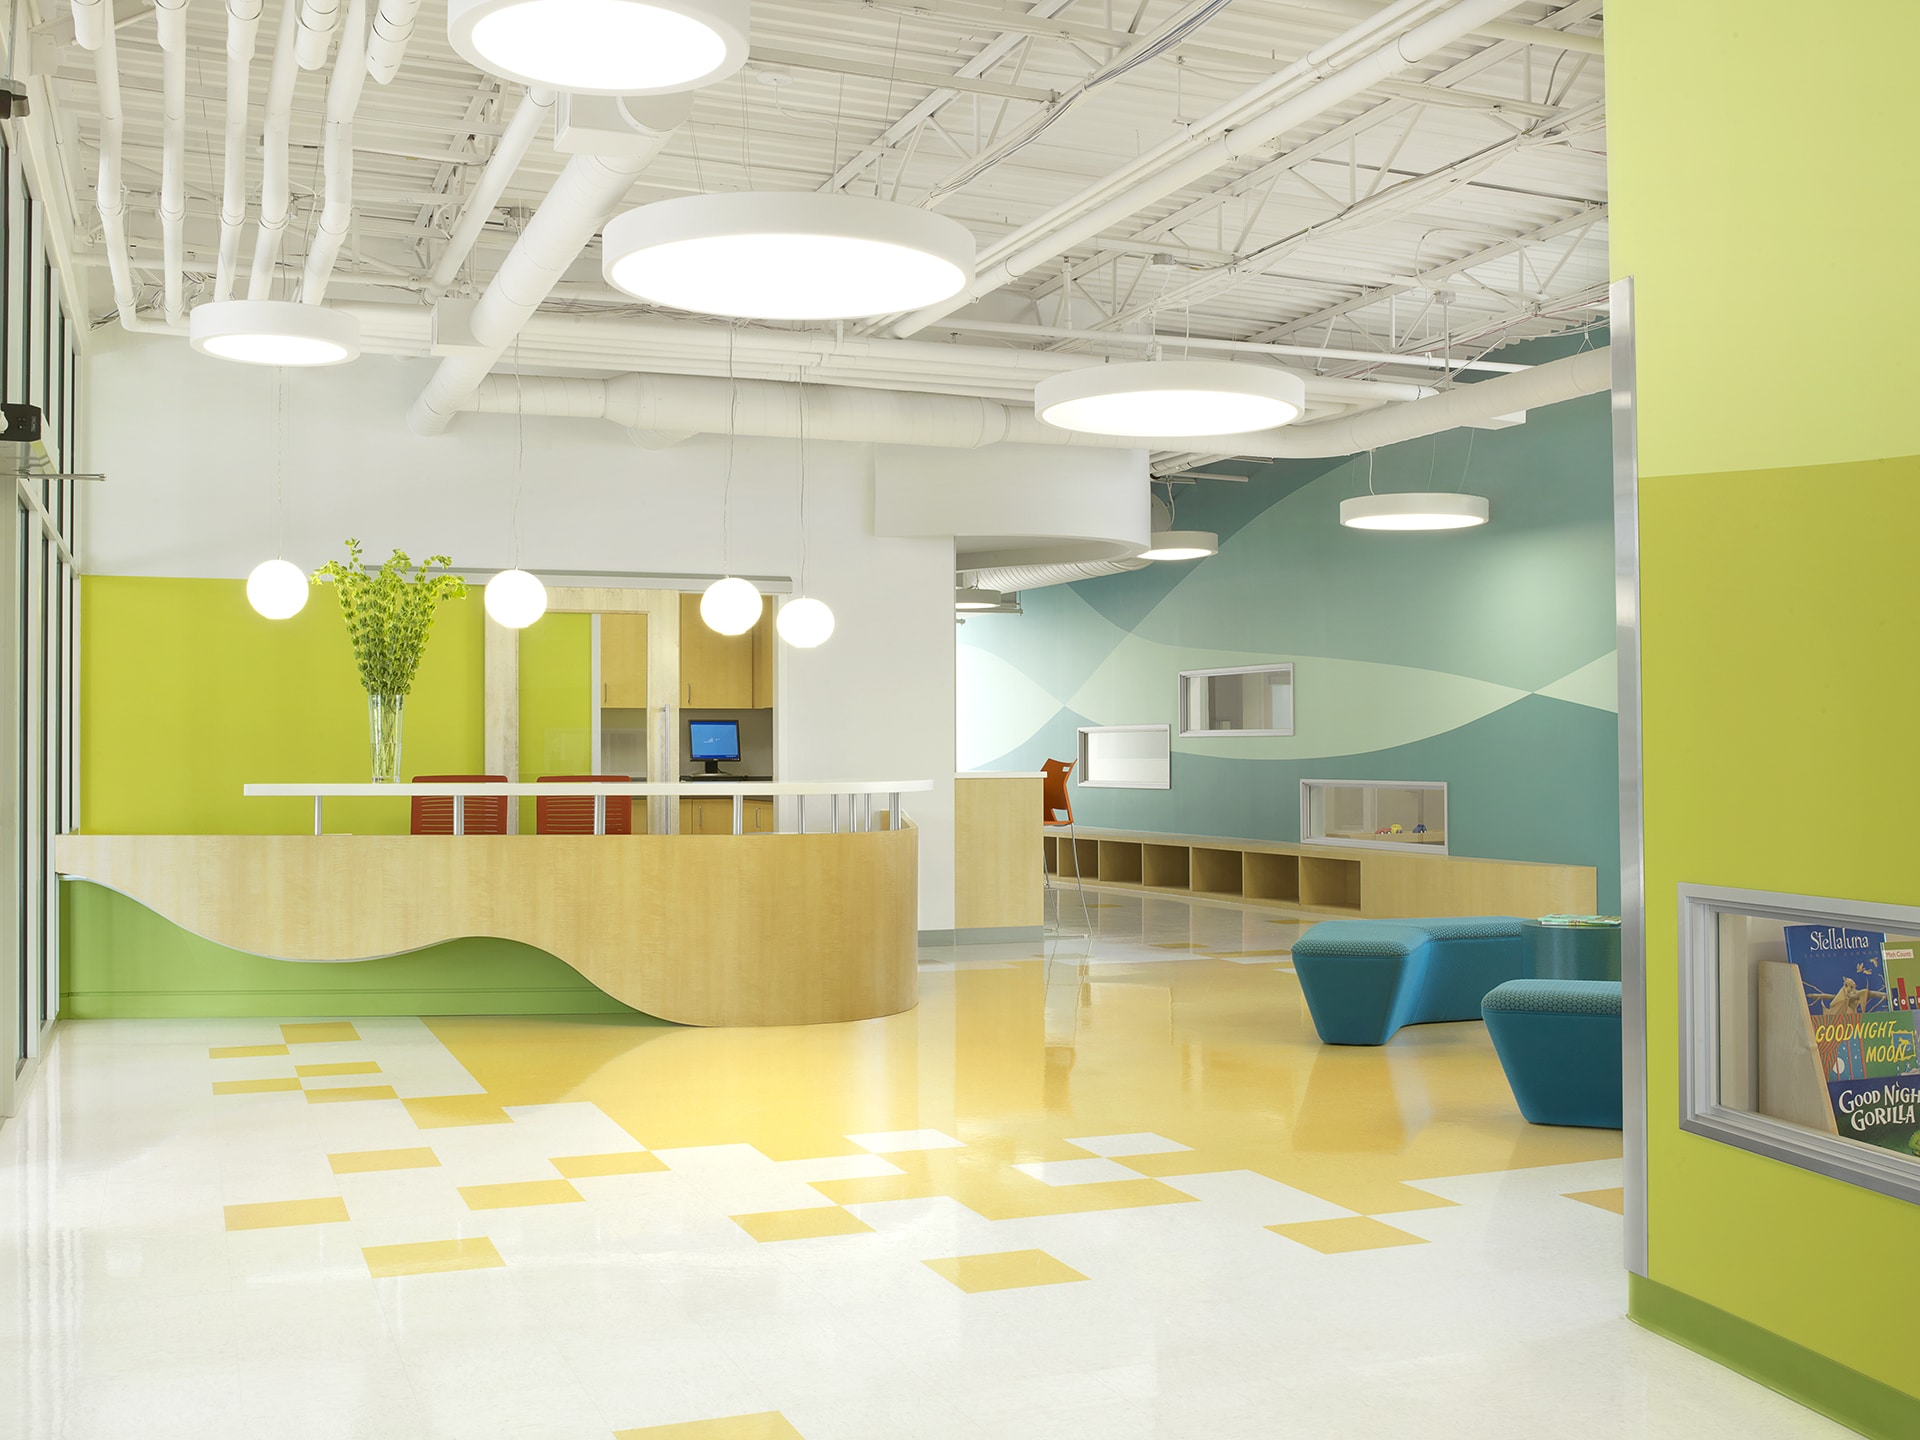 lobby of early childhood school designed by trivers architectural firm